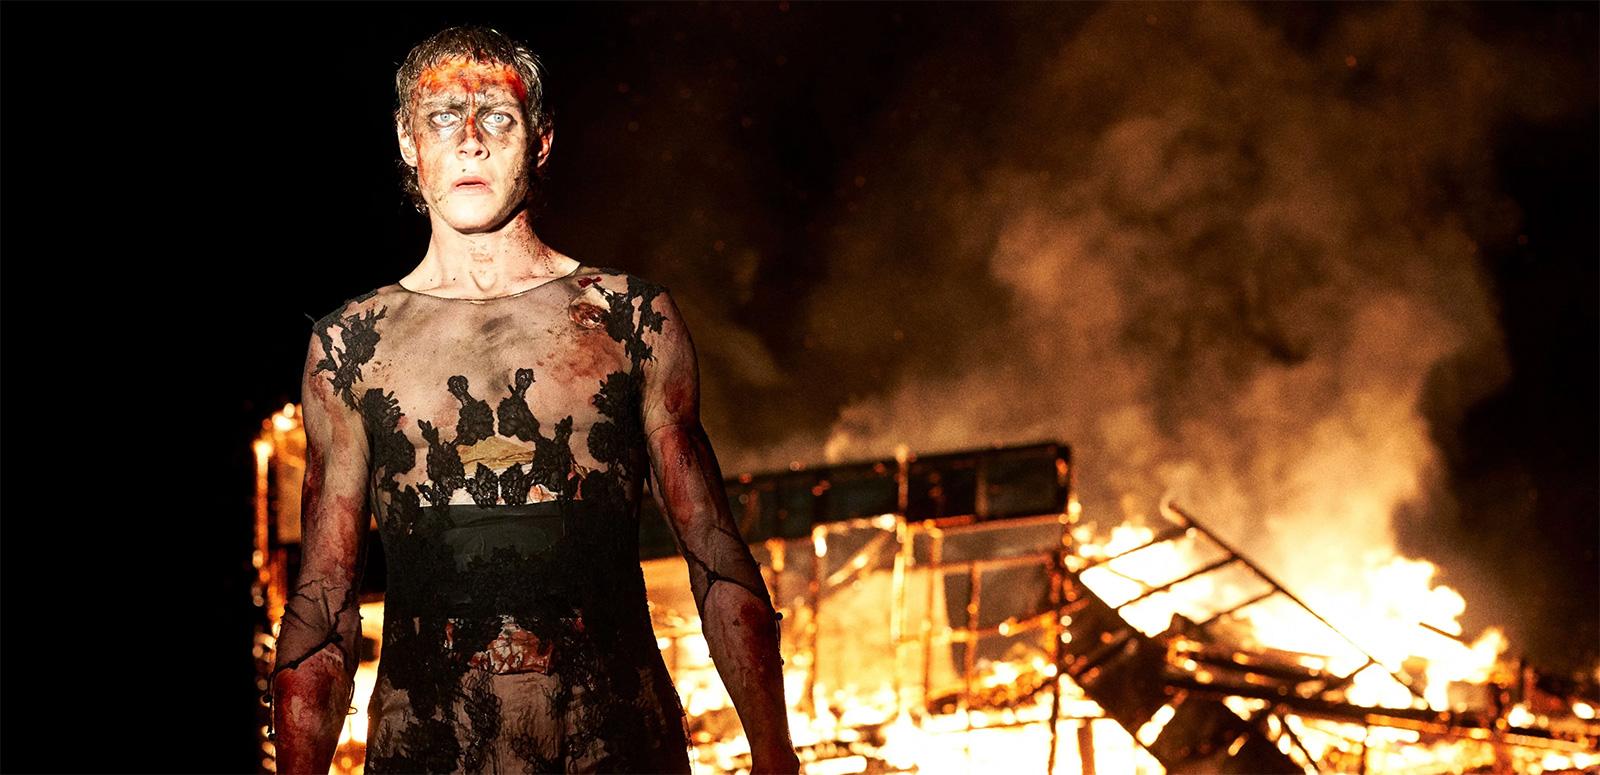 A young man covered in ash and blood standing in front of a house on fire at night